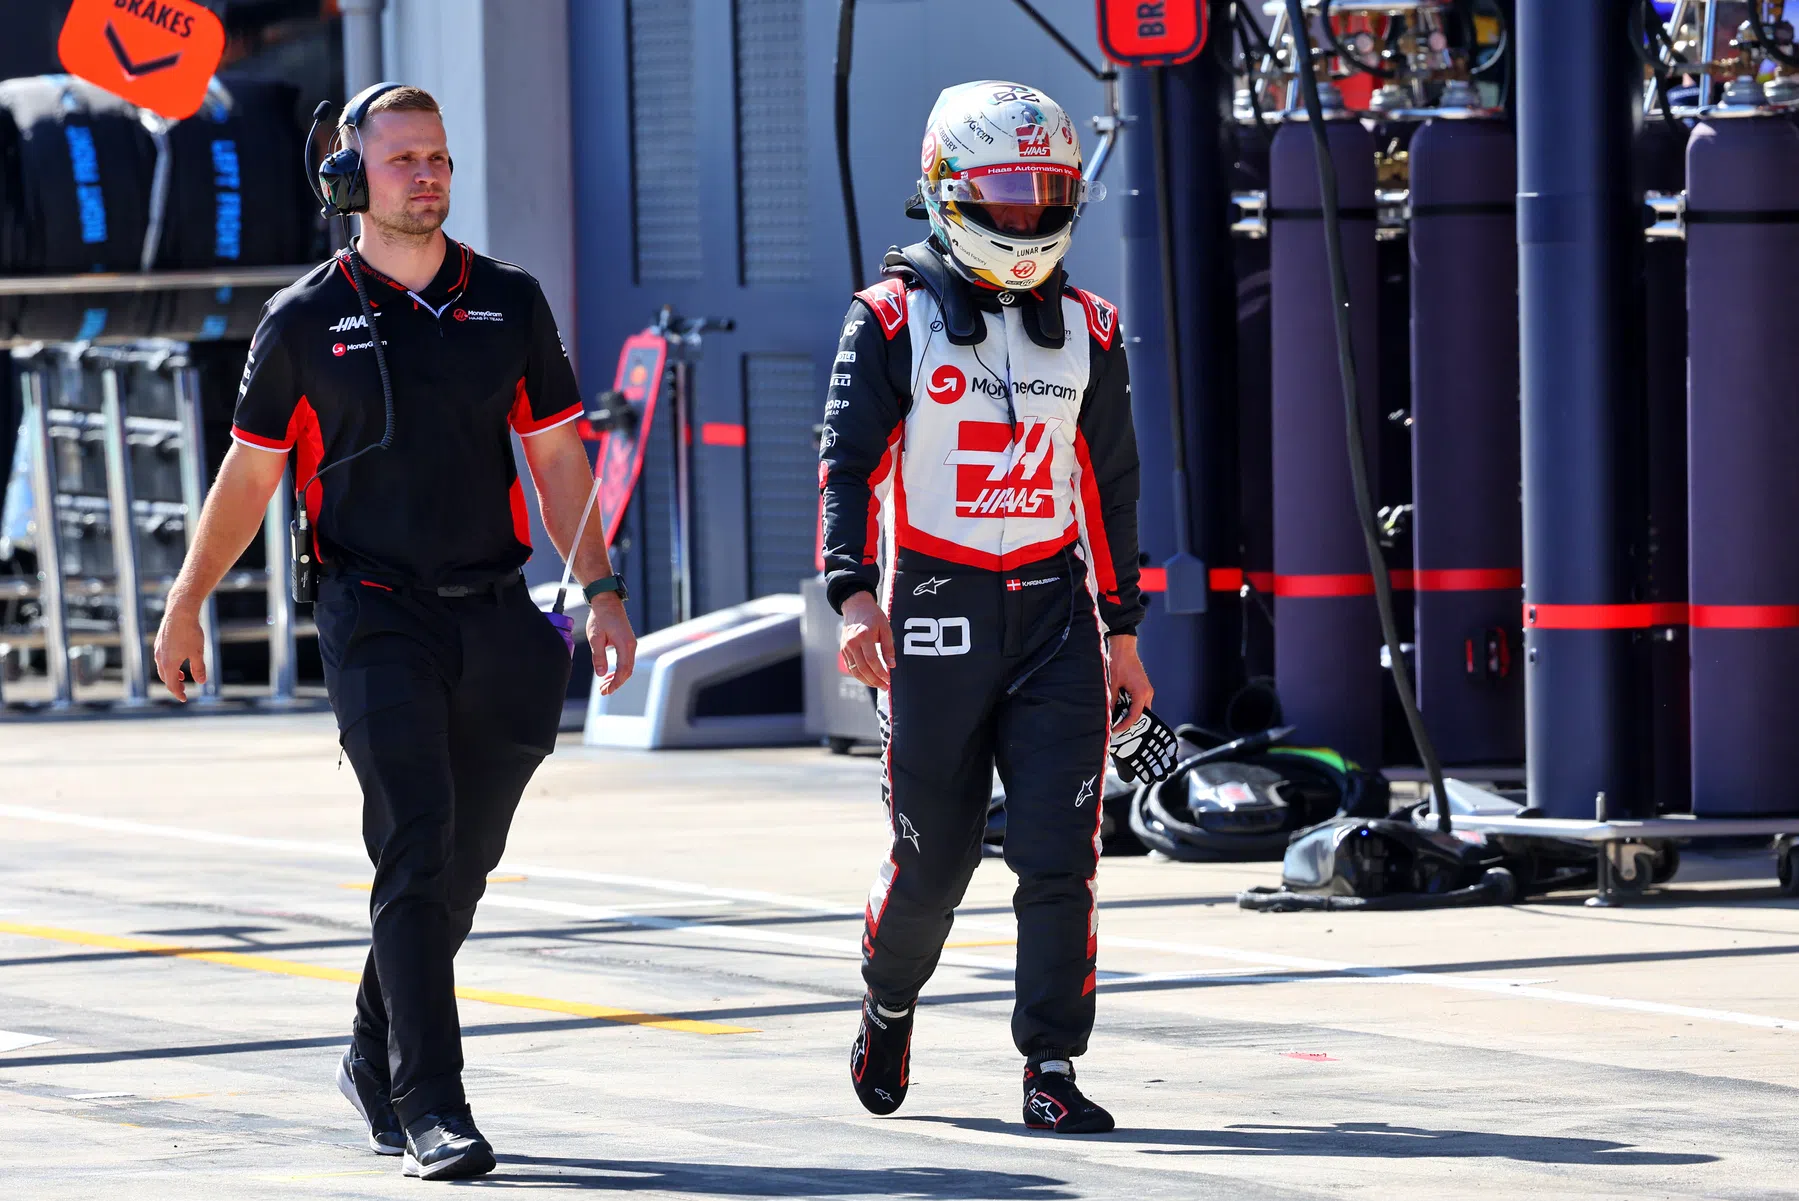 Kevin Magnussen frustrated after being impeded by Piastri in qualifying